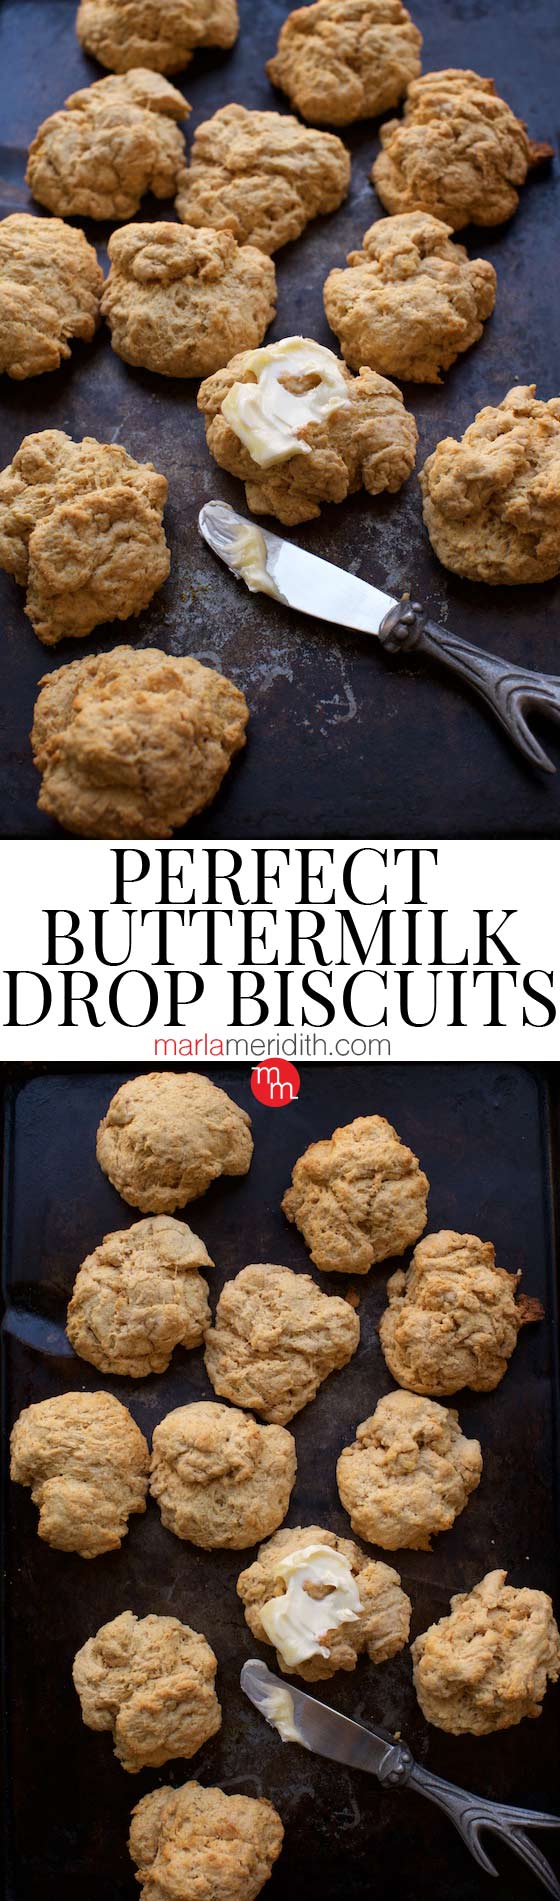 The most PERFECT BUTTERMILK DROP BISCUITS you will ever eat! Get the #recipe on MarlaMeridith.com #biscuits